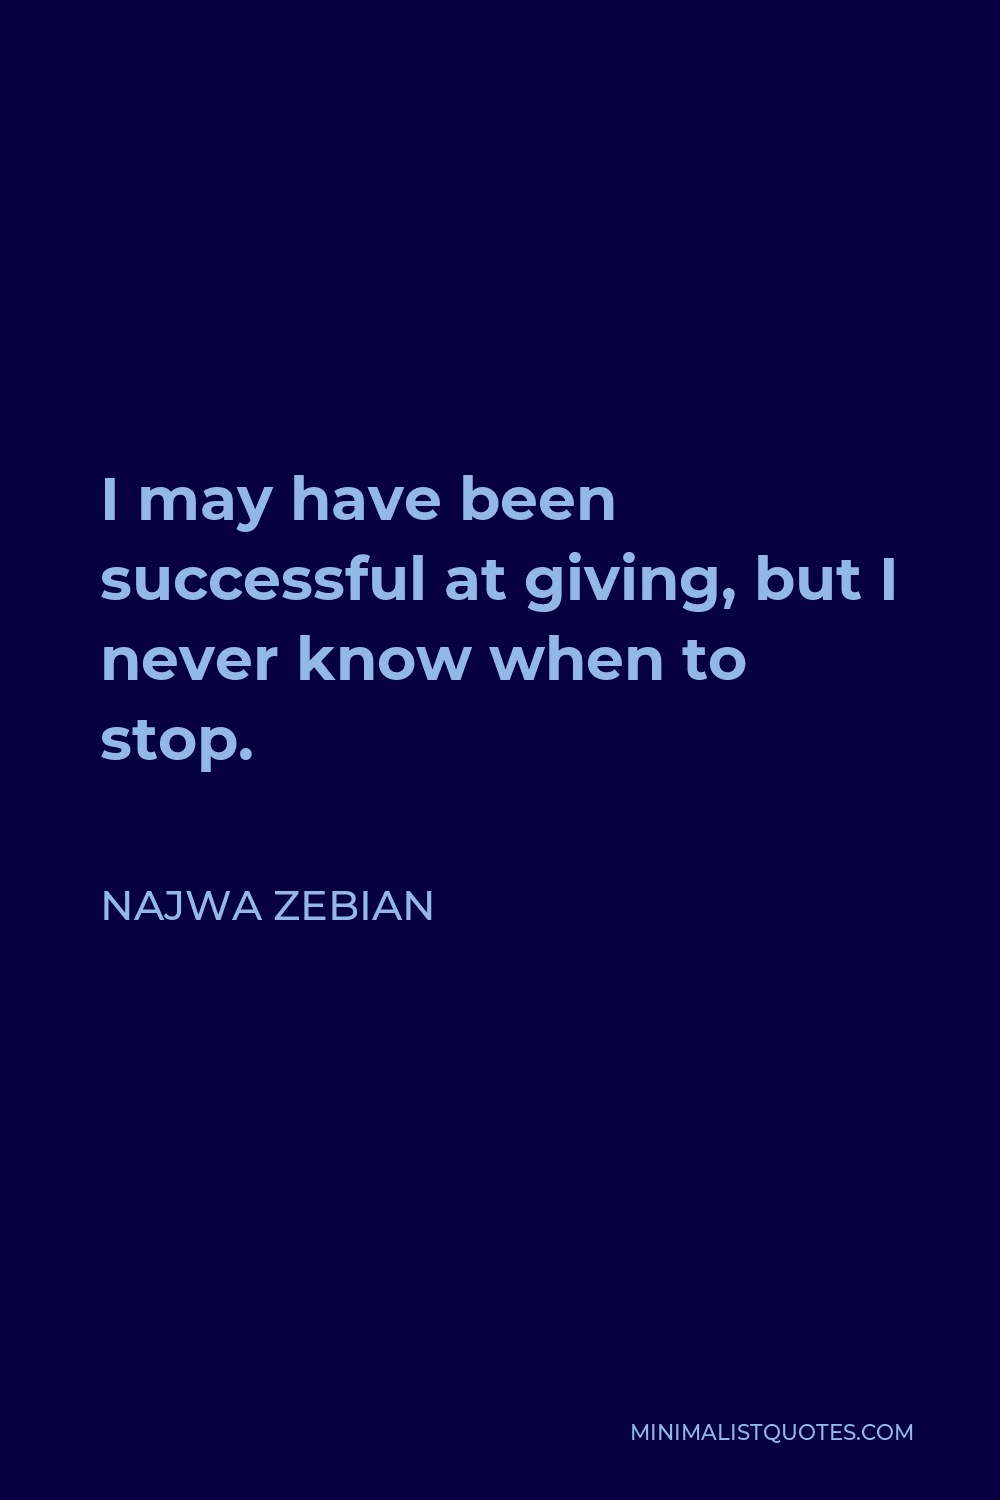 Najwa Zebian Quote - I may have been successful at giving, but I never know when to stop.